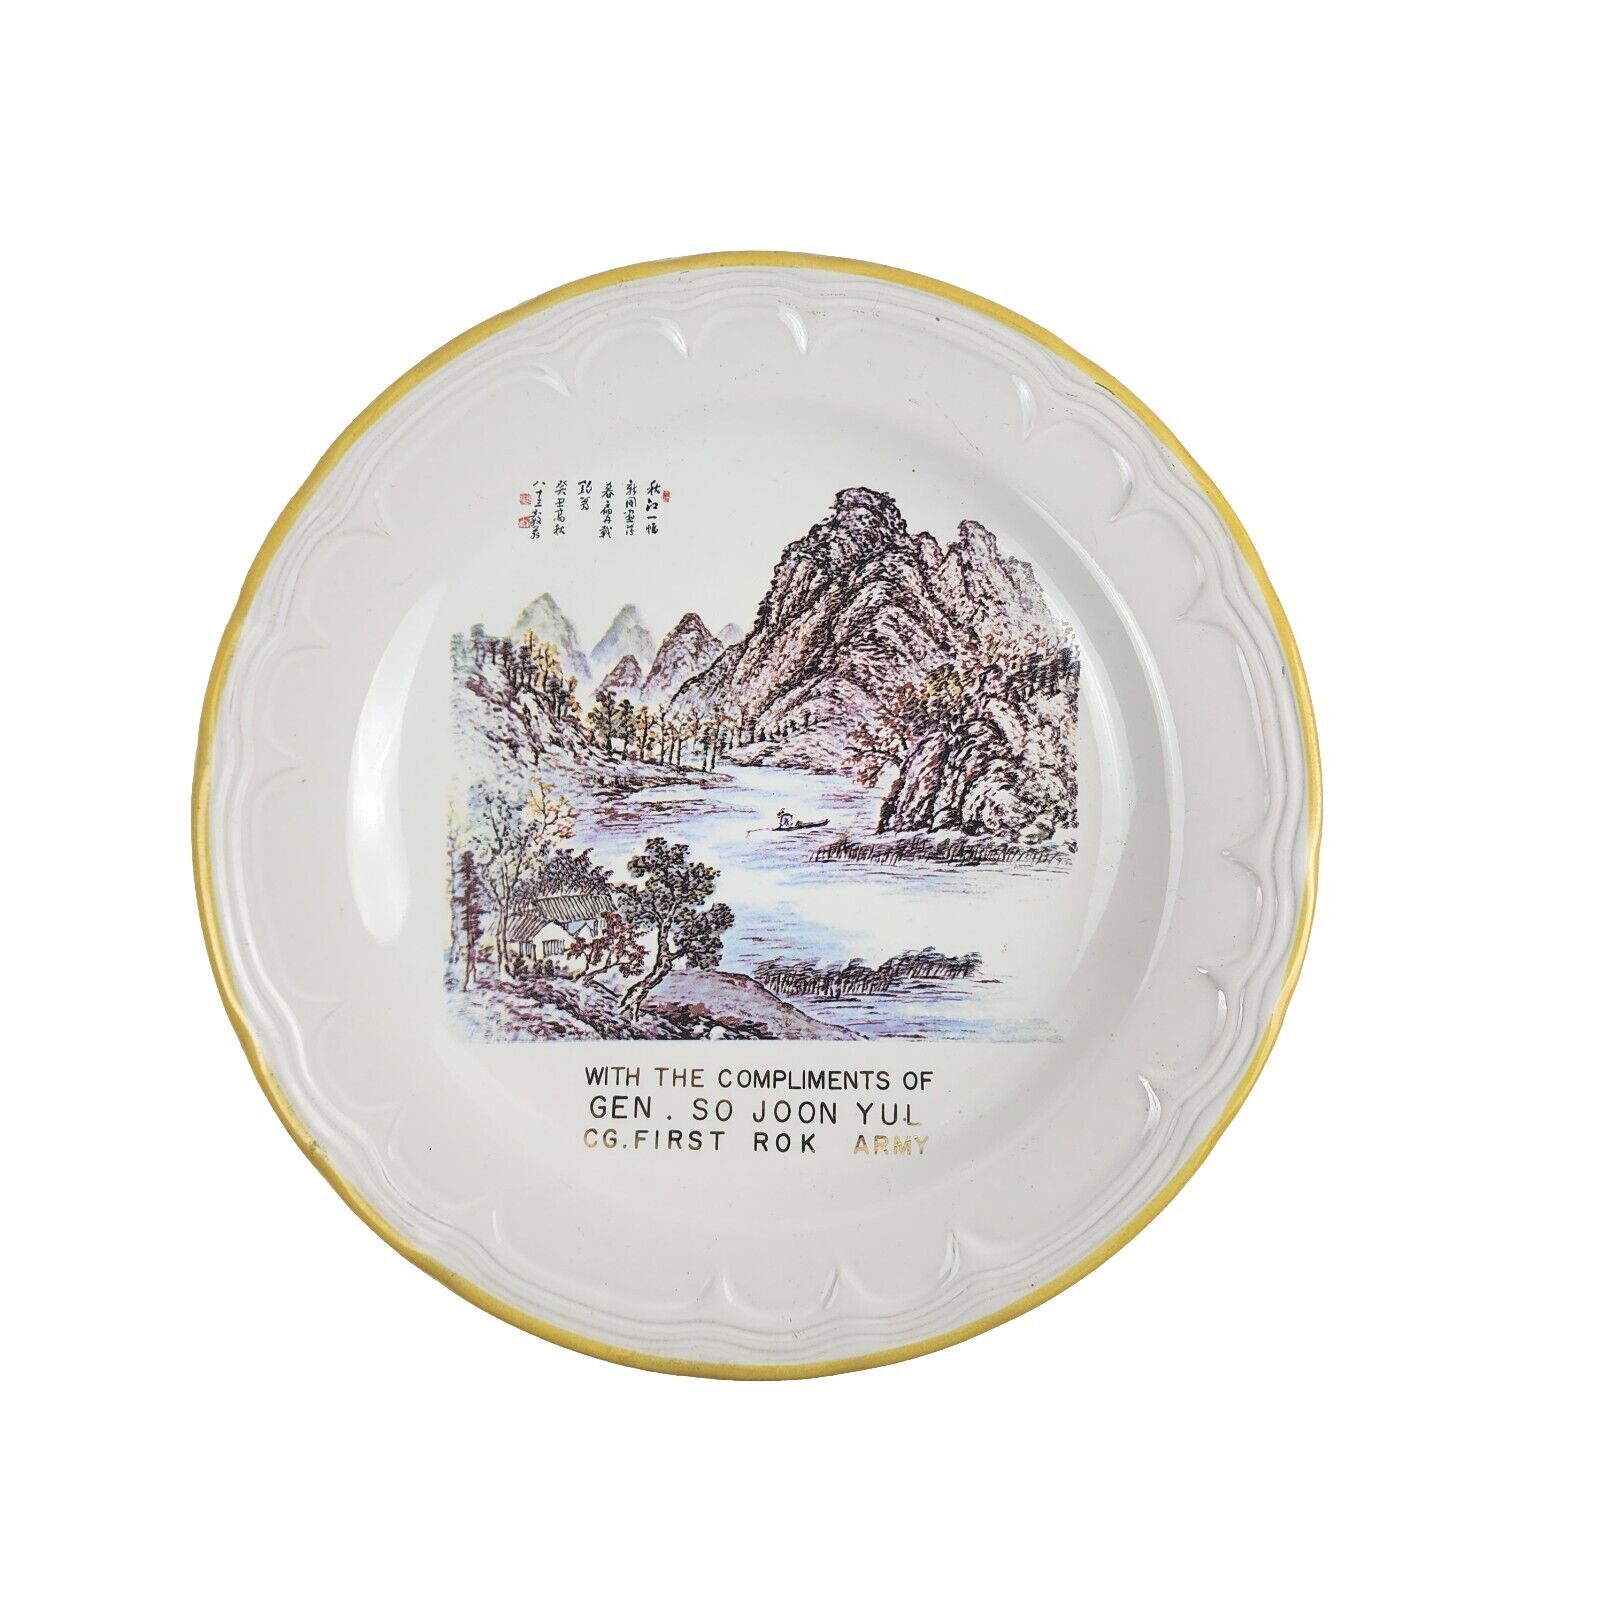 Vintage Korean Military Collectible plate gifted to SMA William A Connelly 